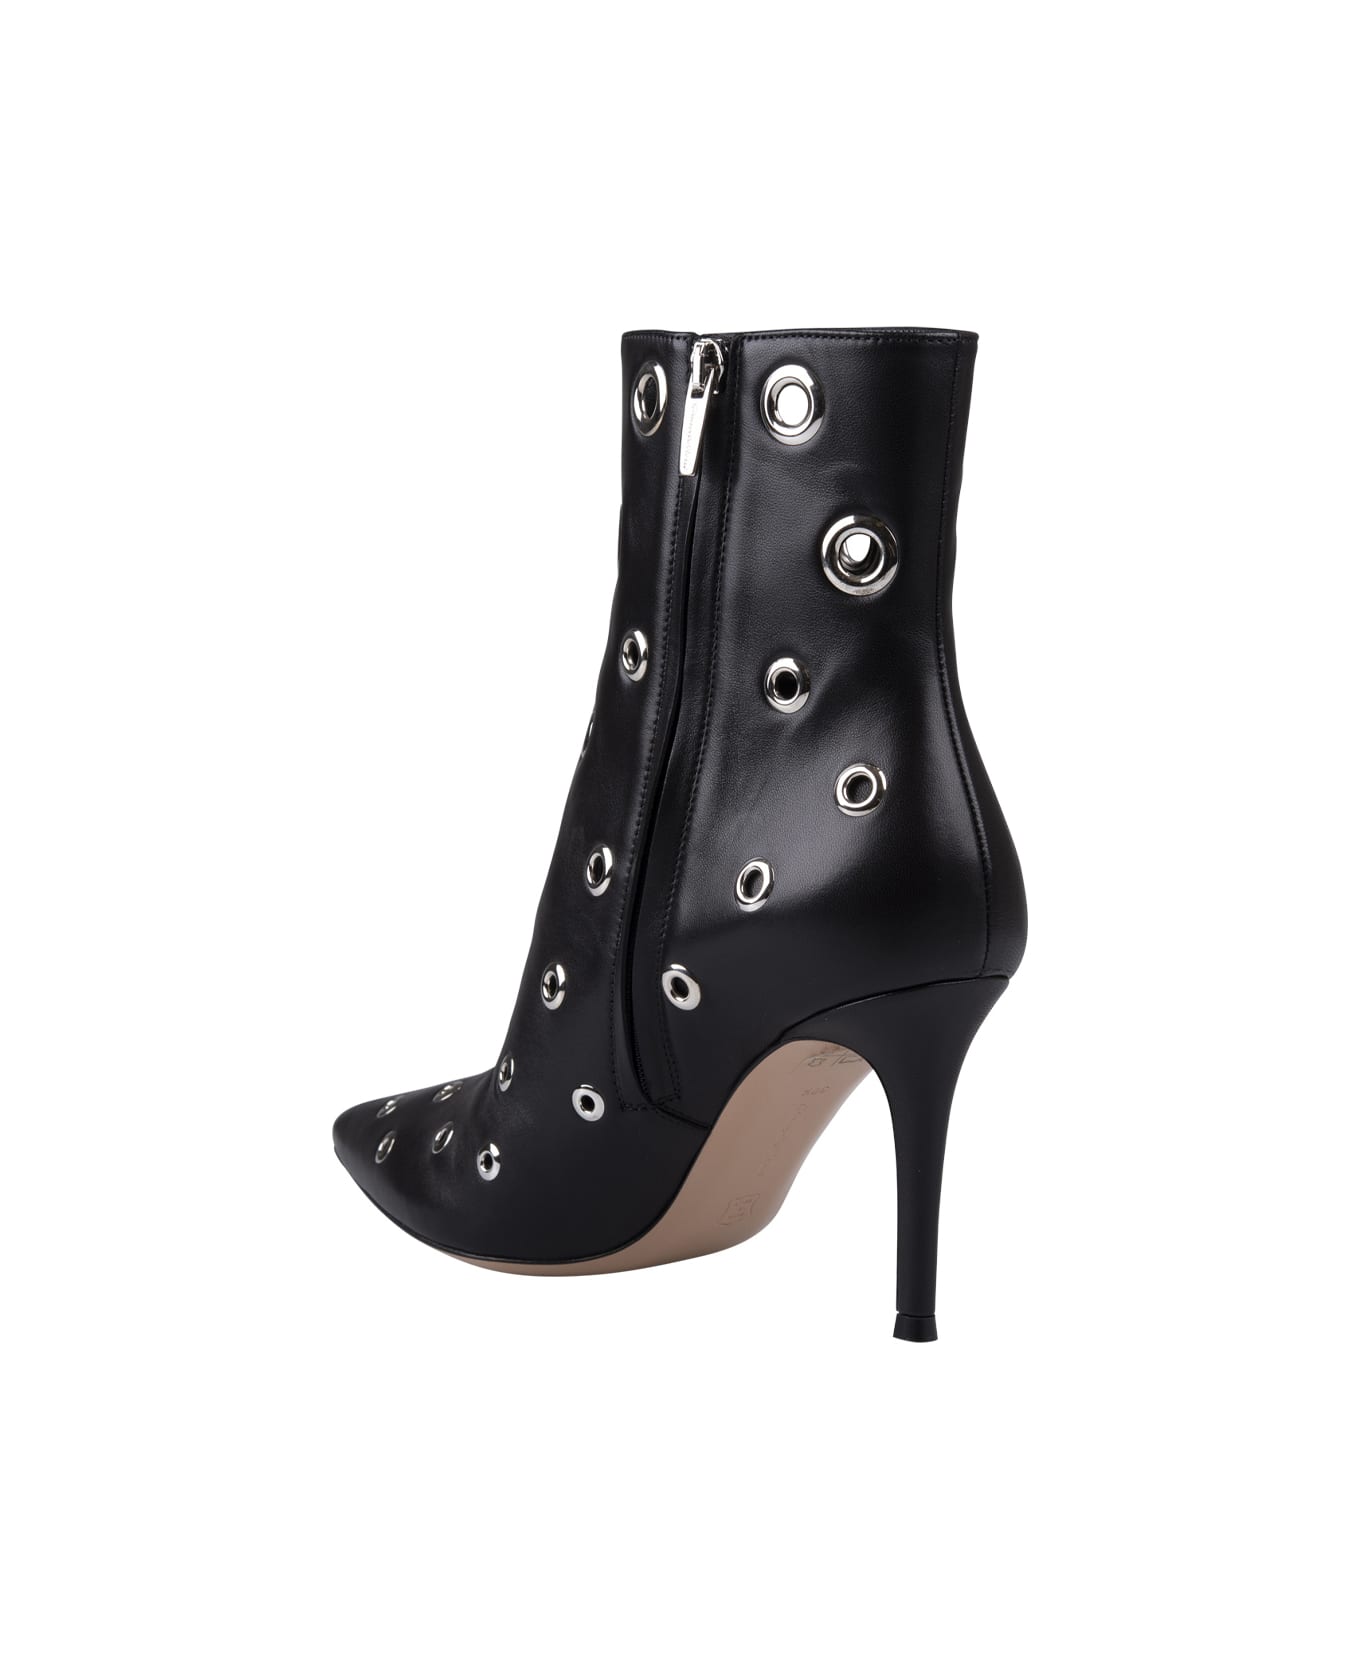 Gianvito Rossi Lydia Bootie 85 Ankle Boots In Black - Black ブーツ